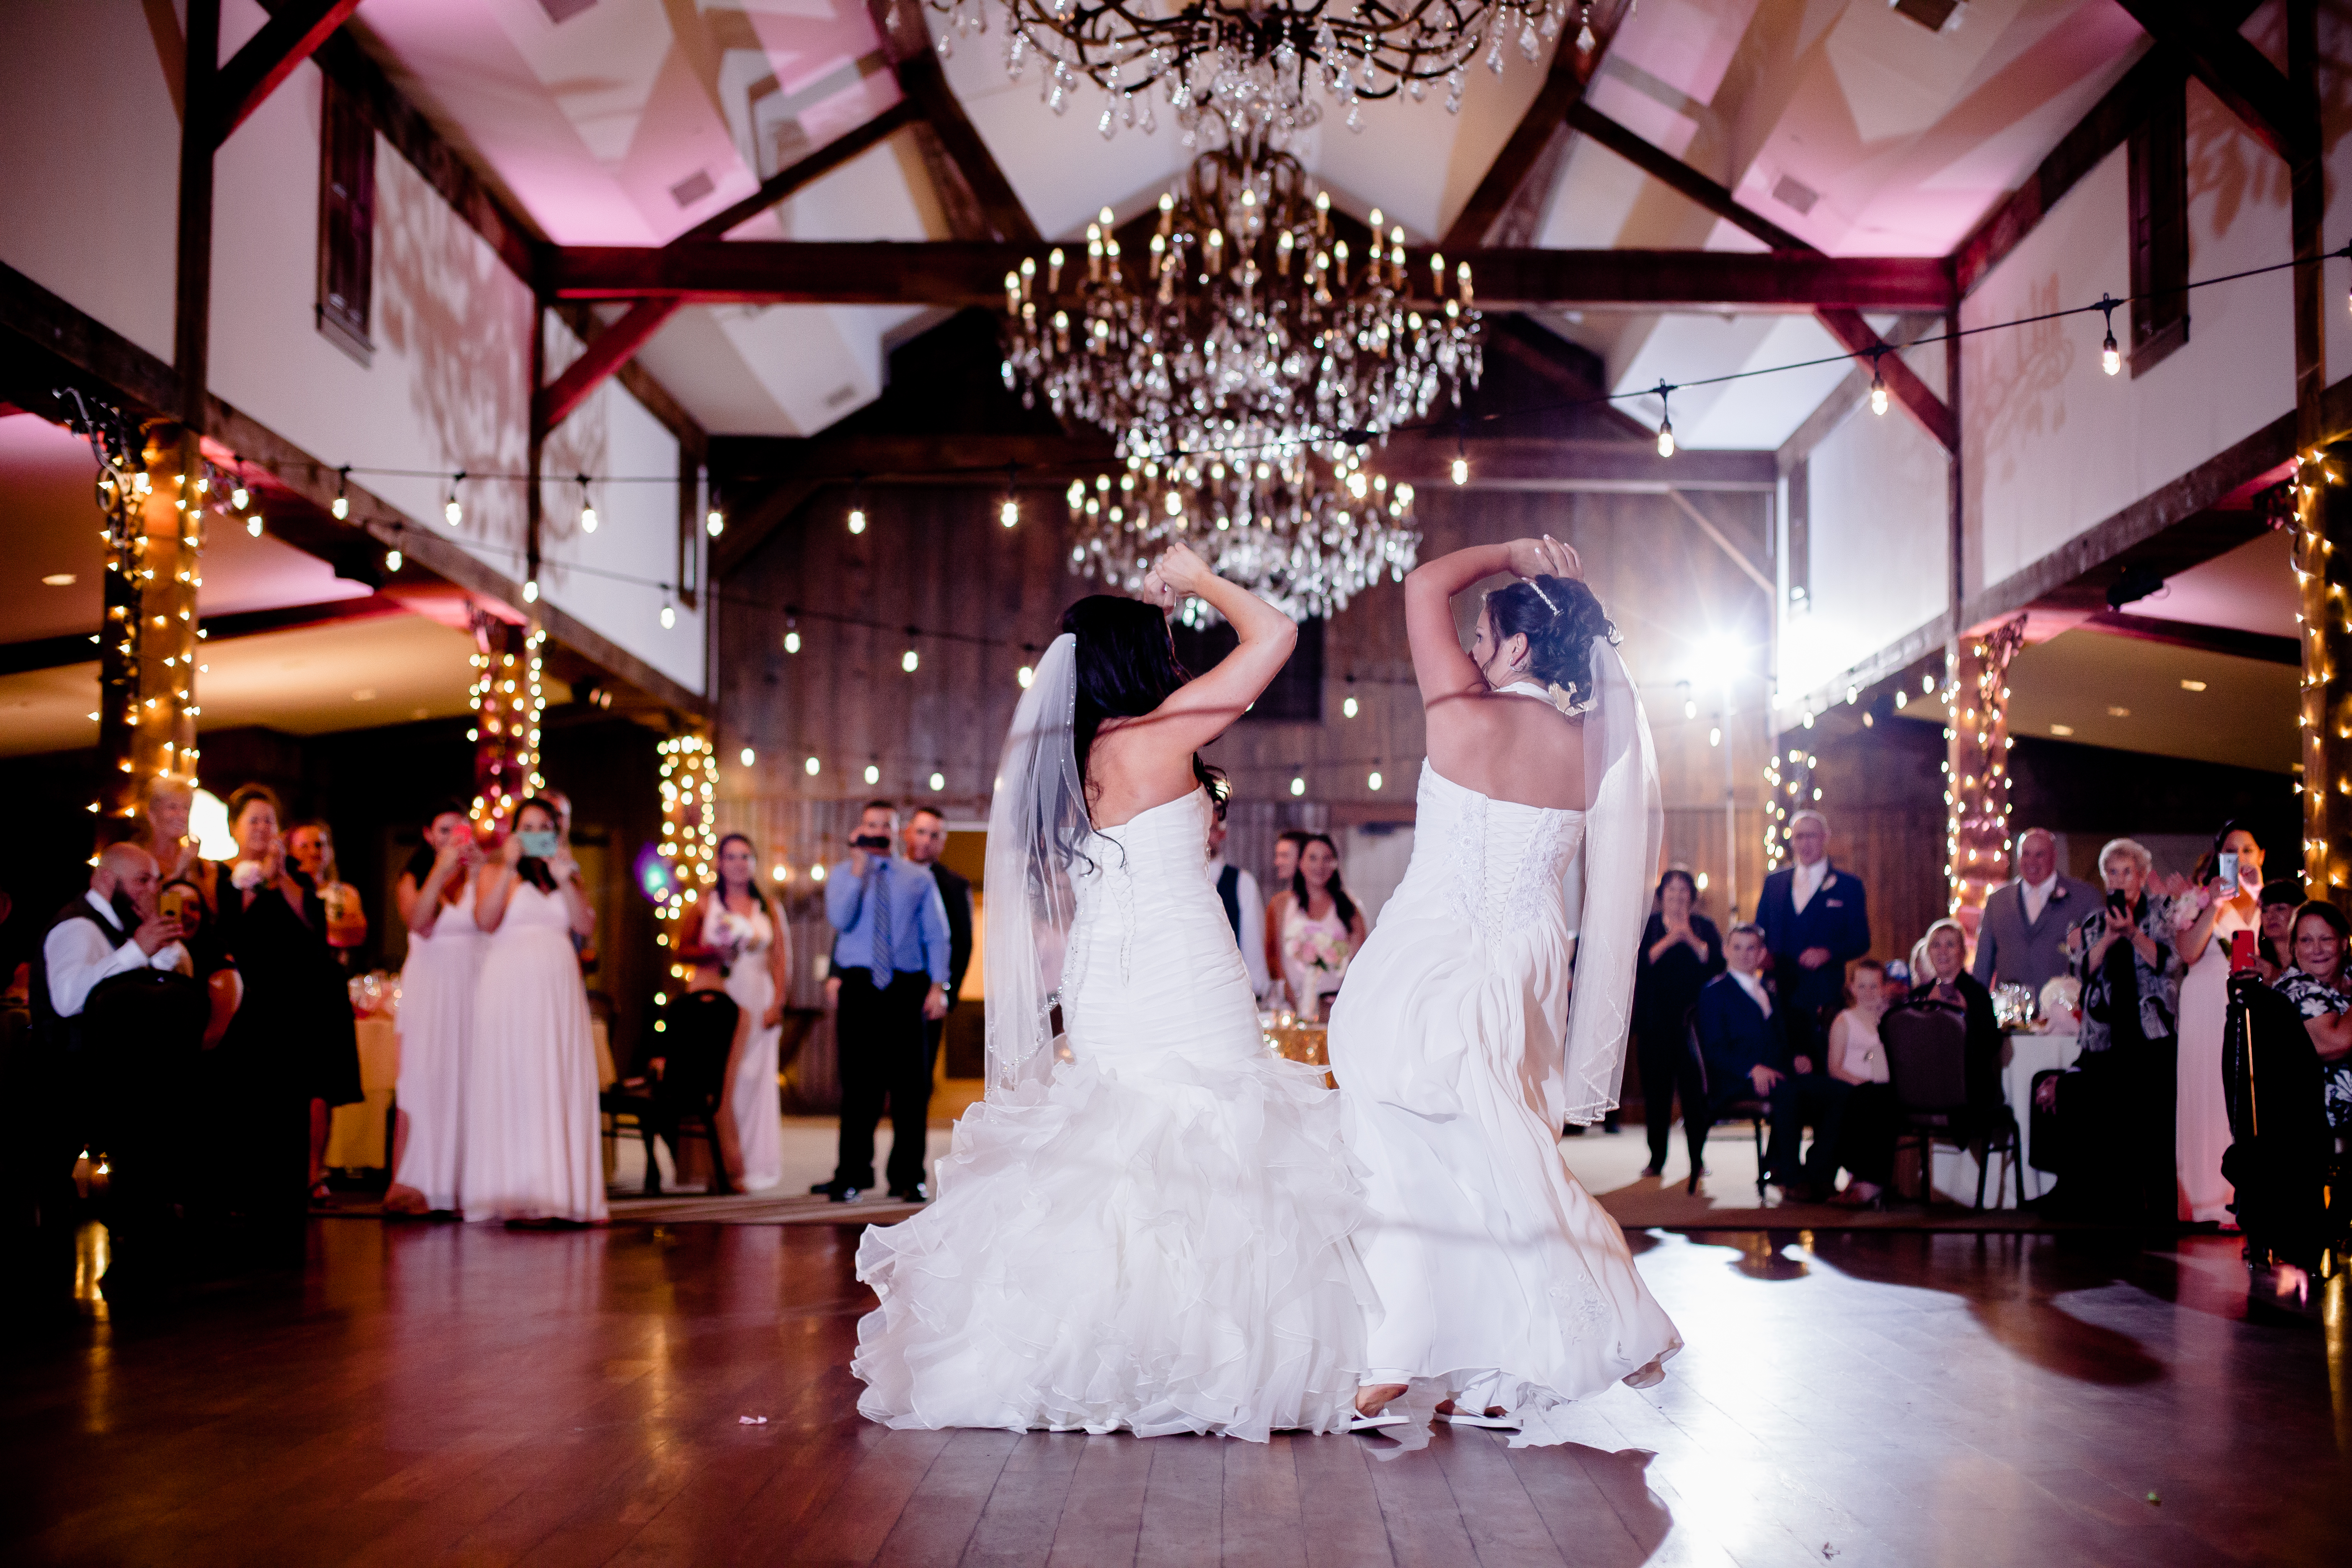 wedding entertainment pricing in nj